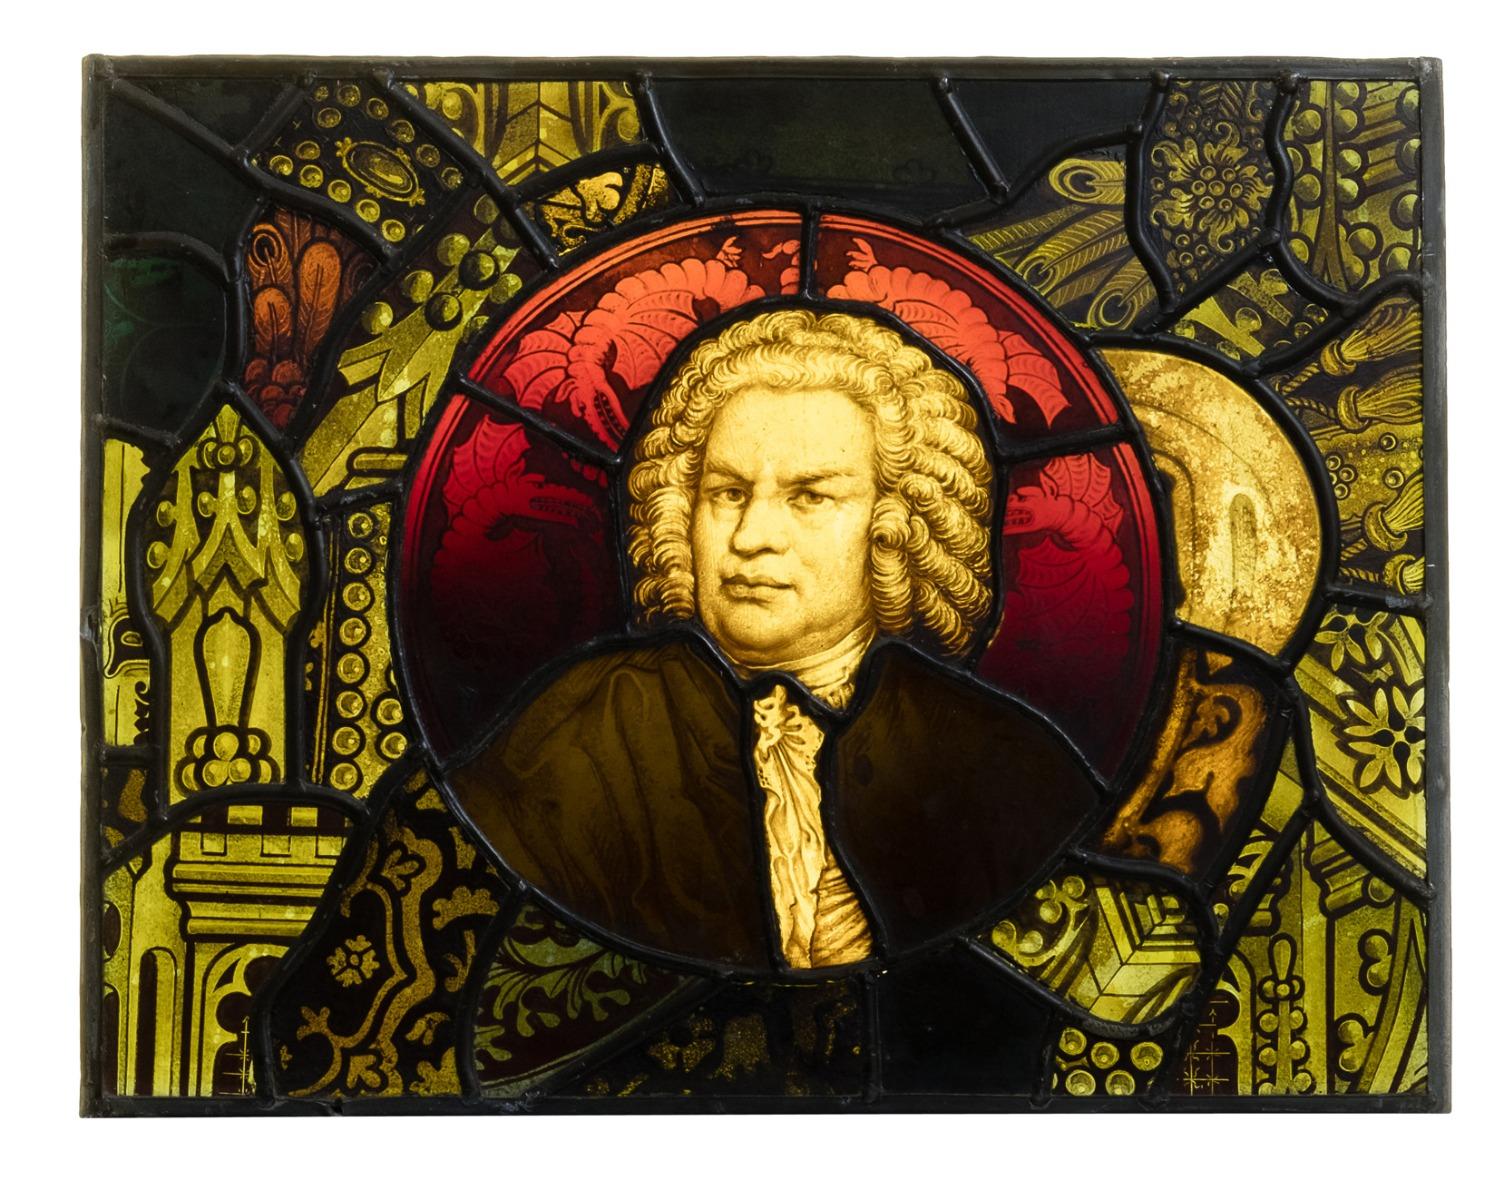 An antique stained glass window panel depicting the composer J.S Bach, in period dress.